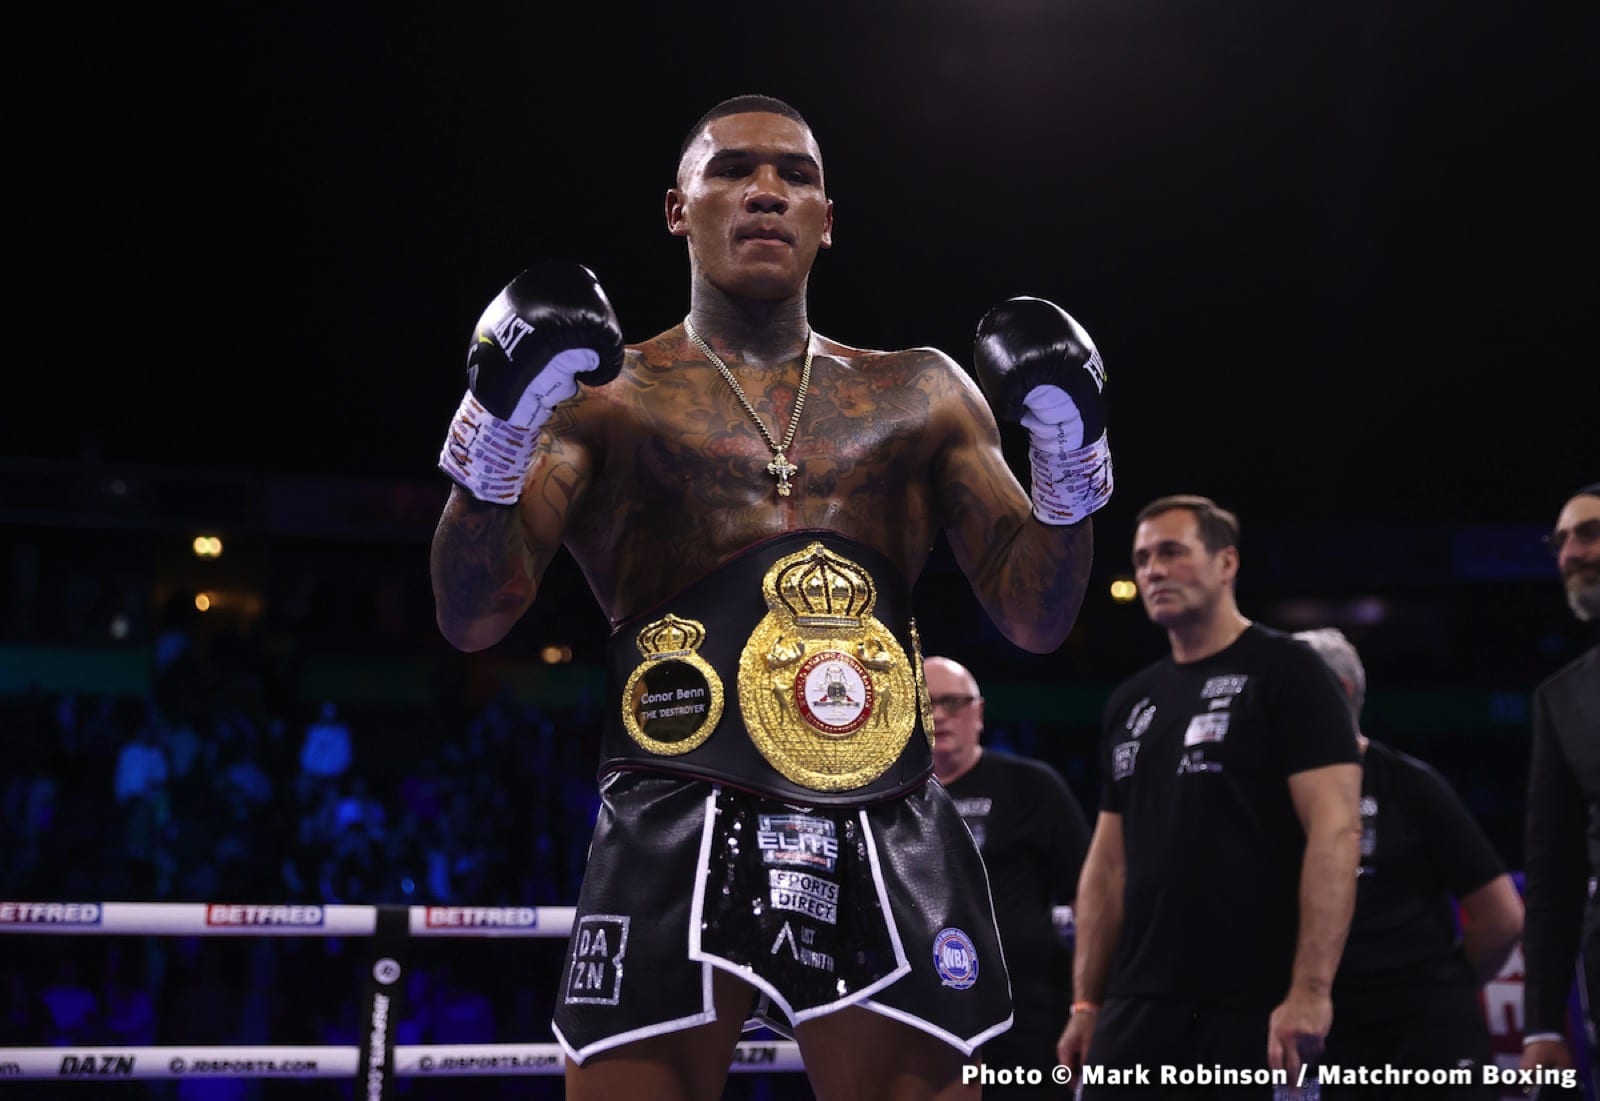 Conor Benn vs. Jose Ramirez possible for July 9th at o2 Arena in London